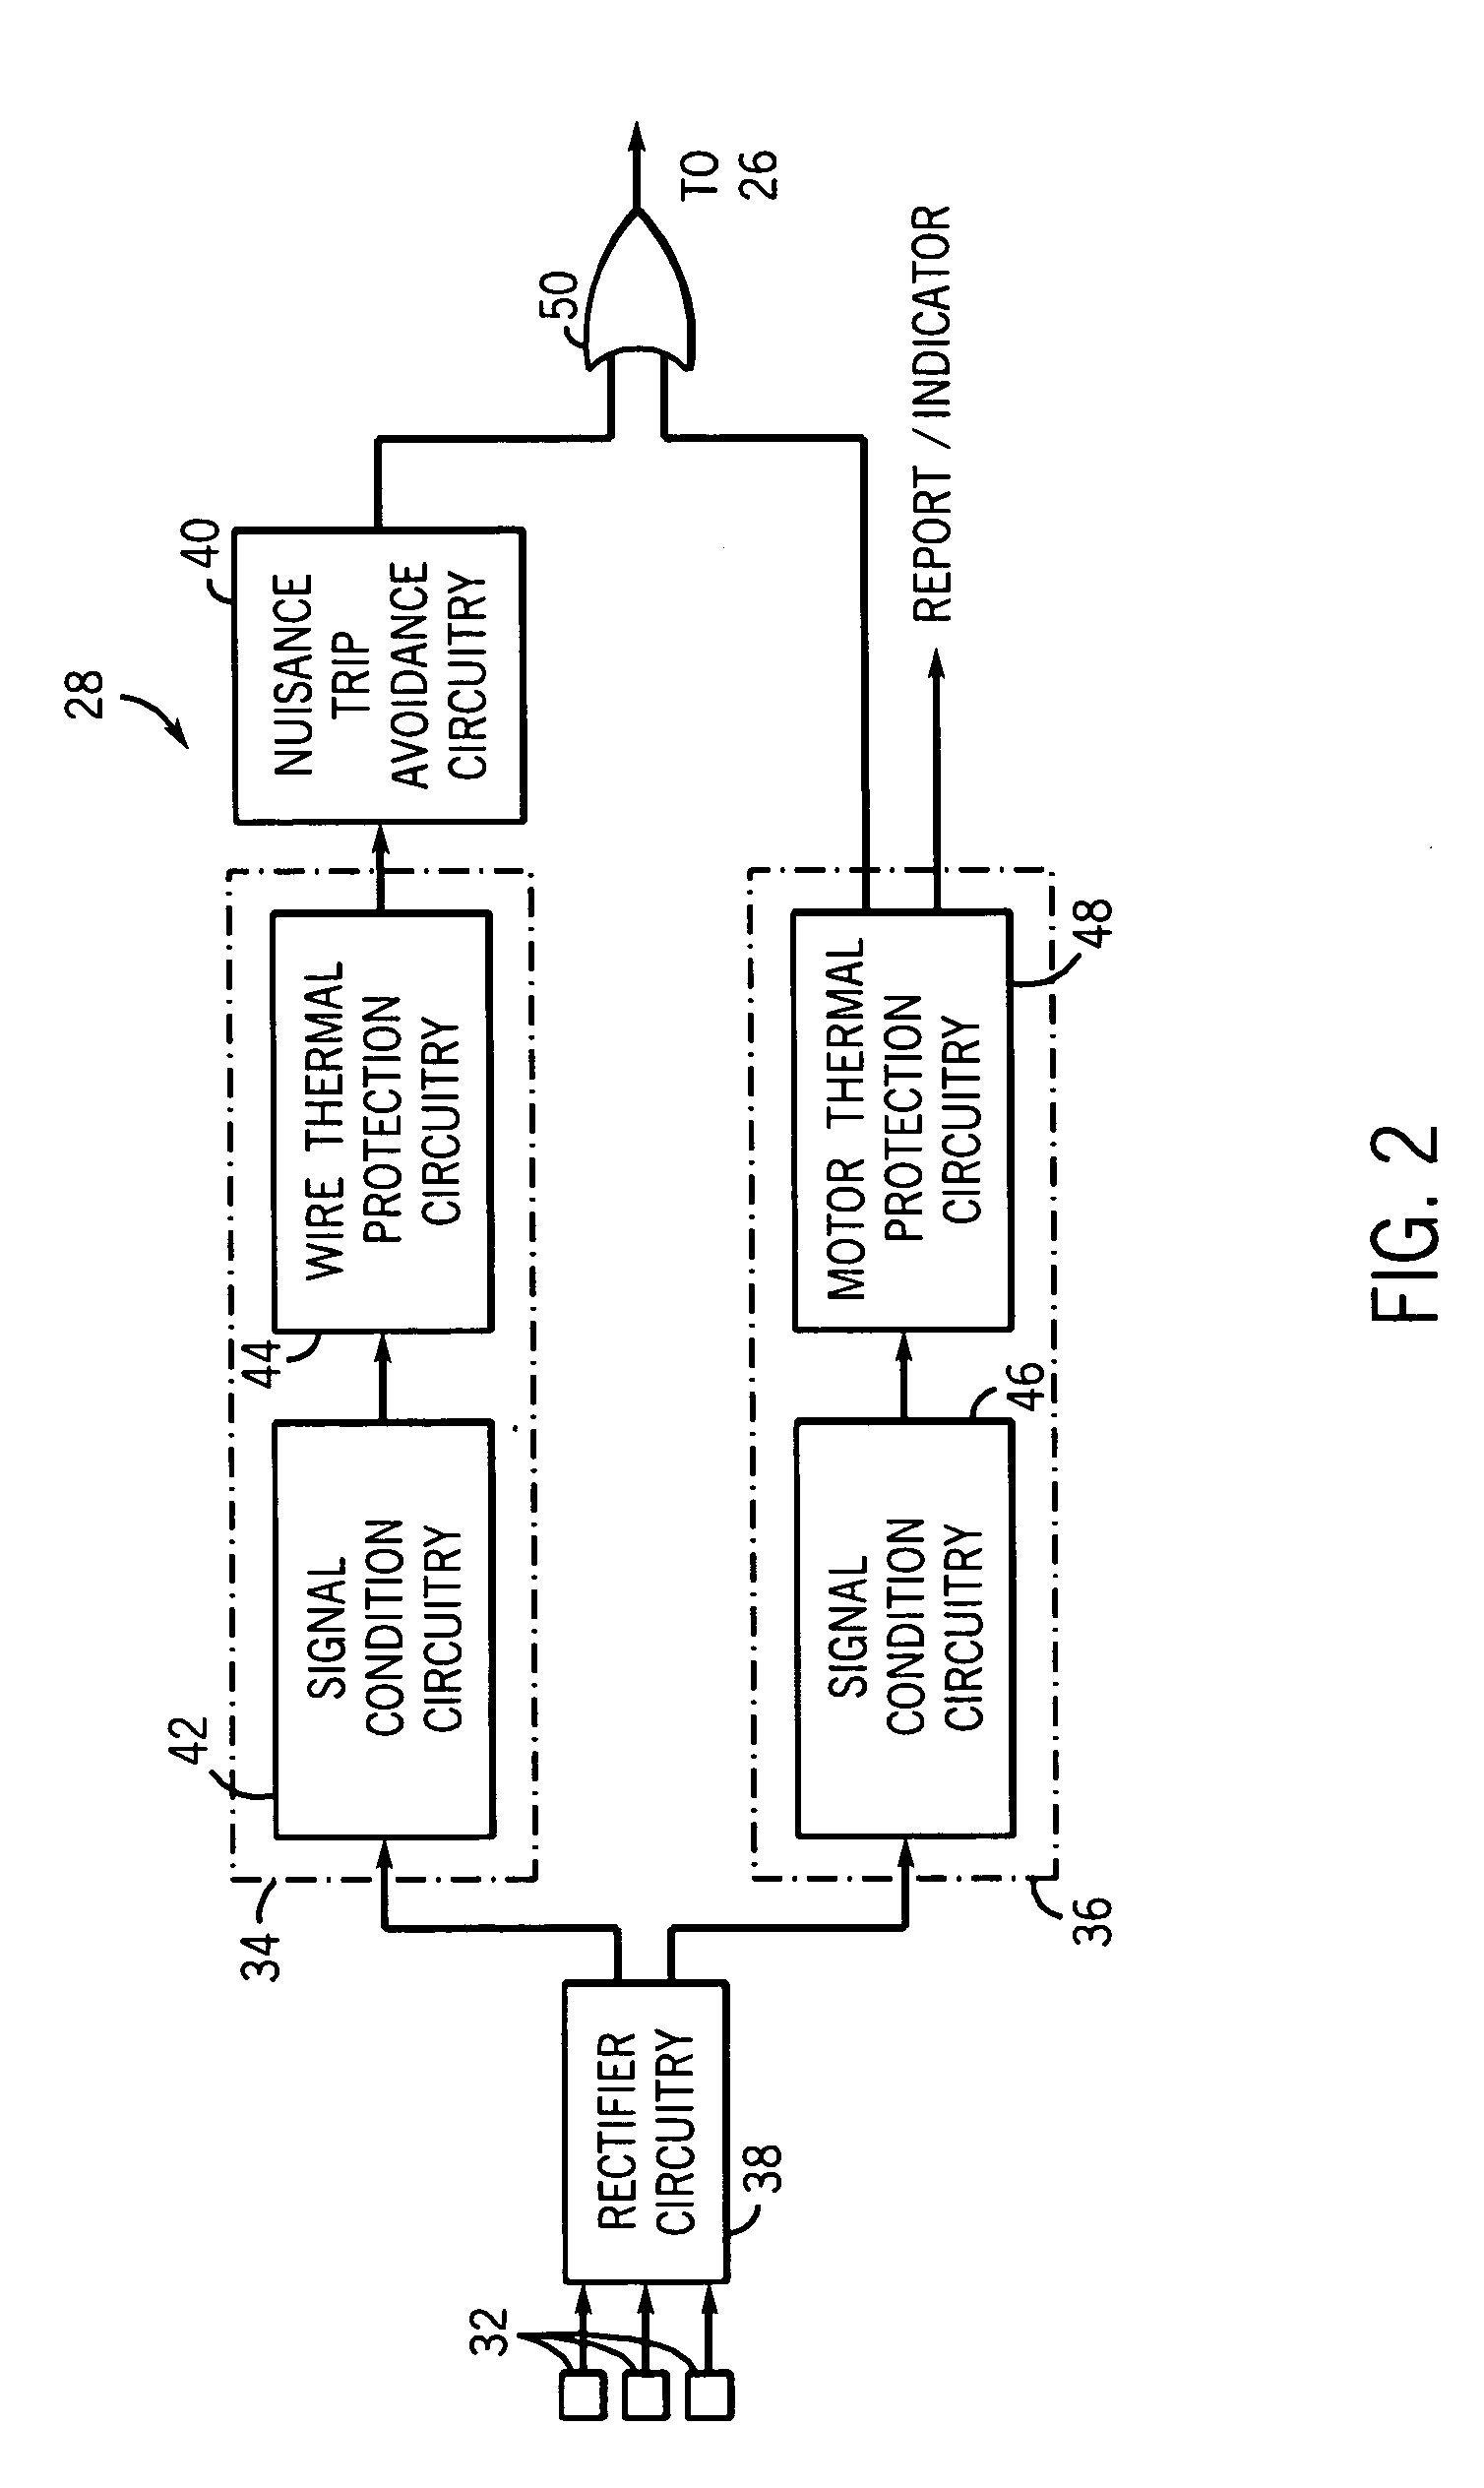 Motor overload tripping system and method with multi-function circuit interrupter